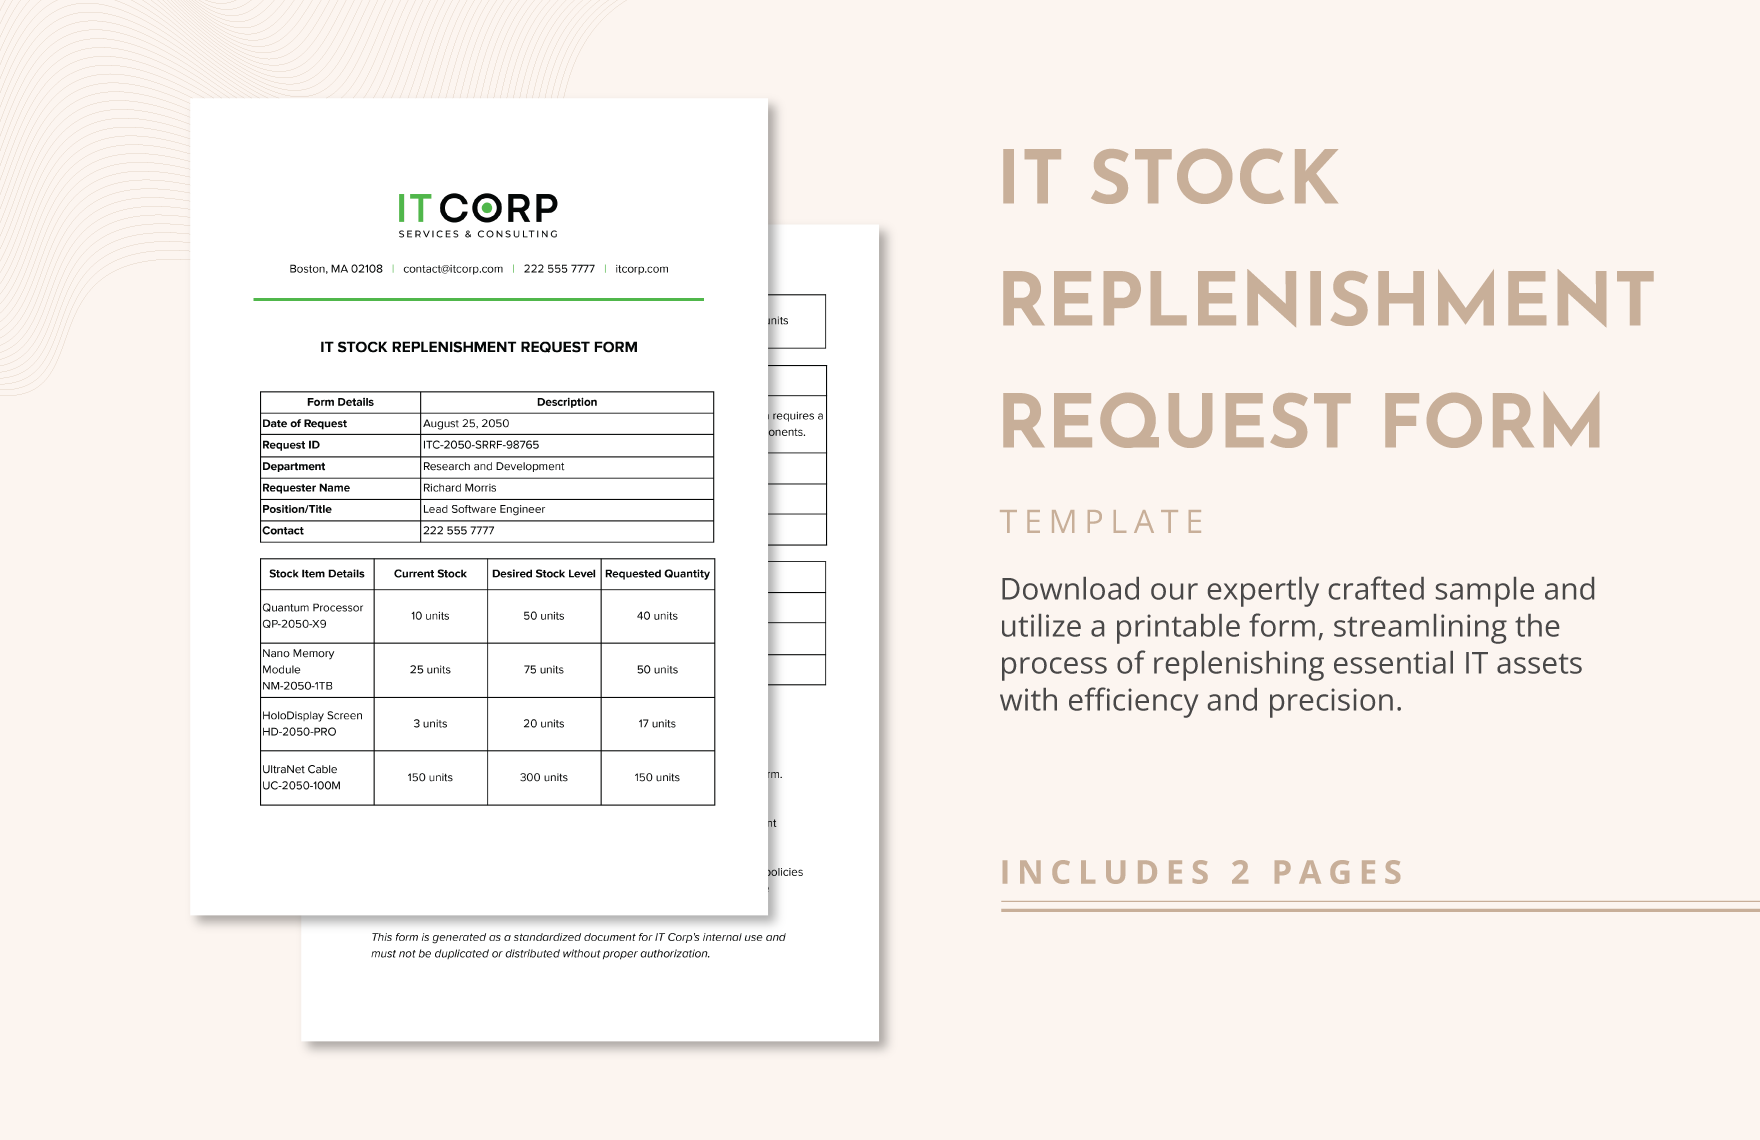 IT Stock Replenishment Request Form Template in Word, Google Docs, PowerPoint